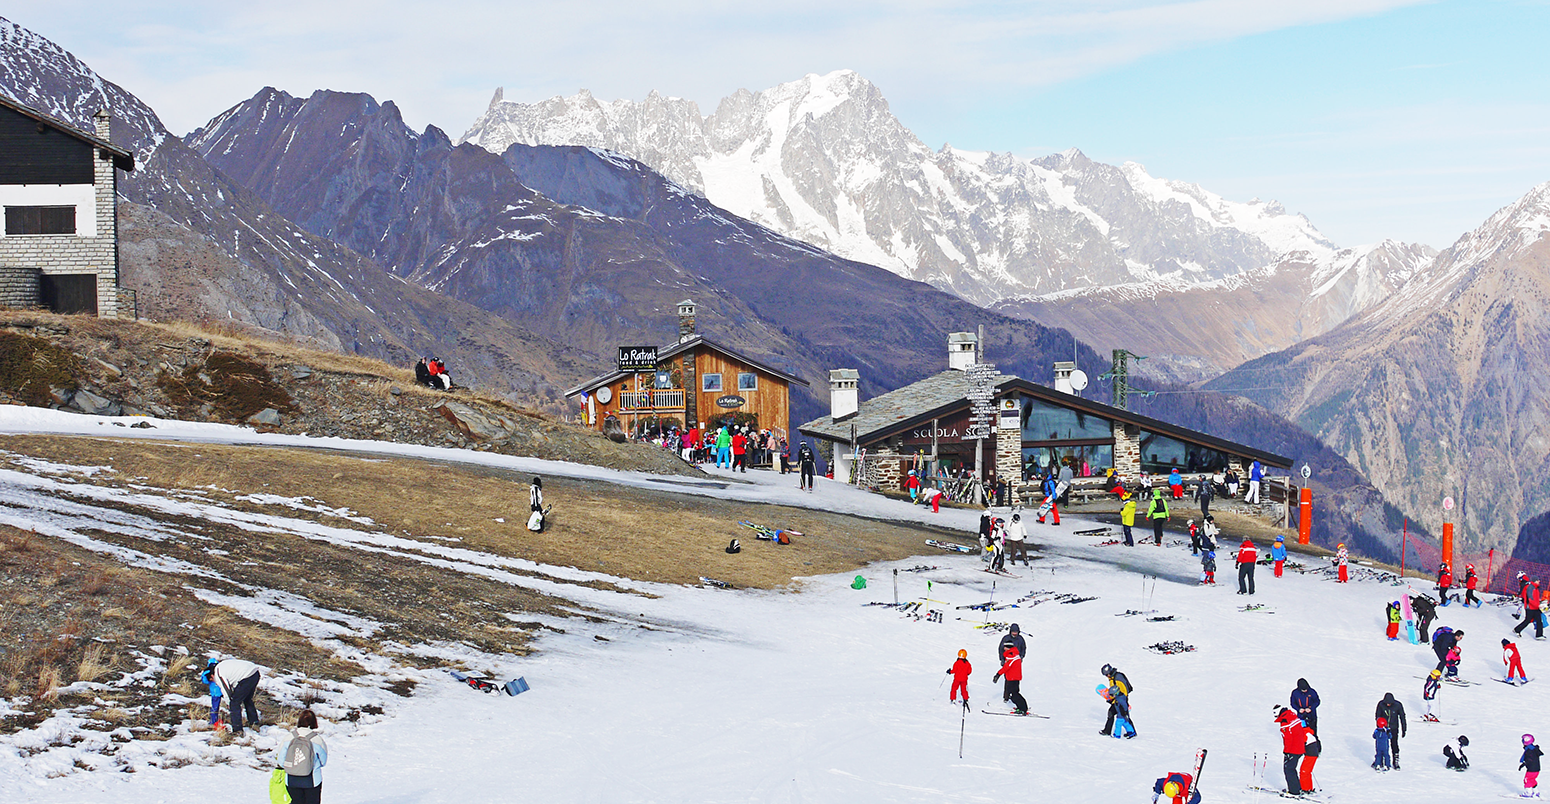 Extreme lack of snow for winter sports at La Thuile ski resort, Italy.